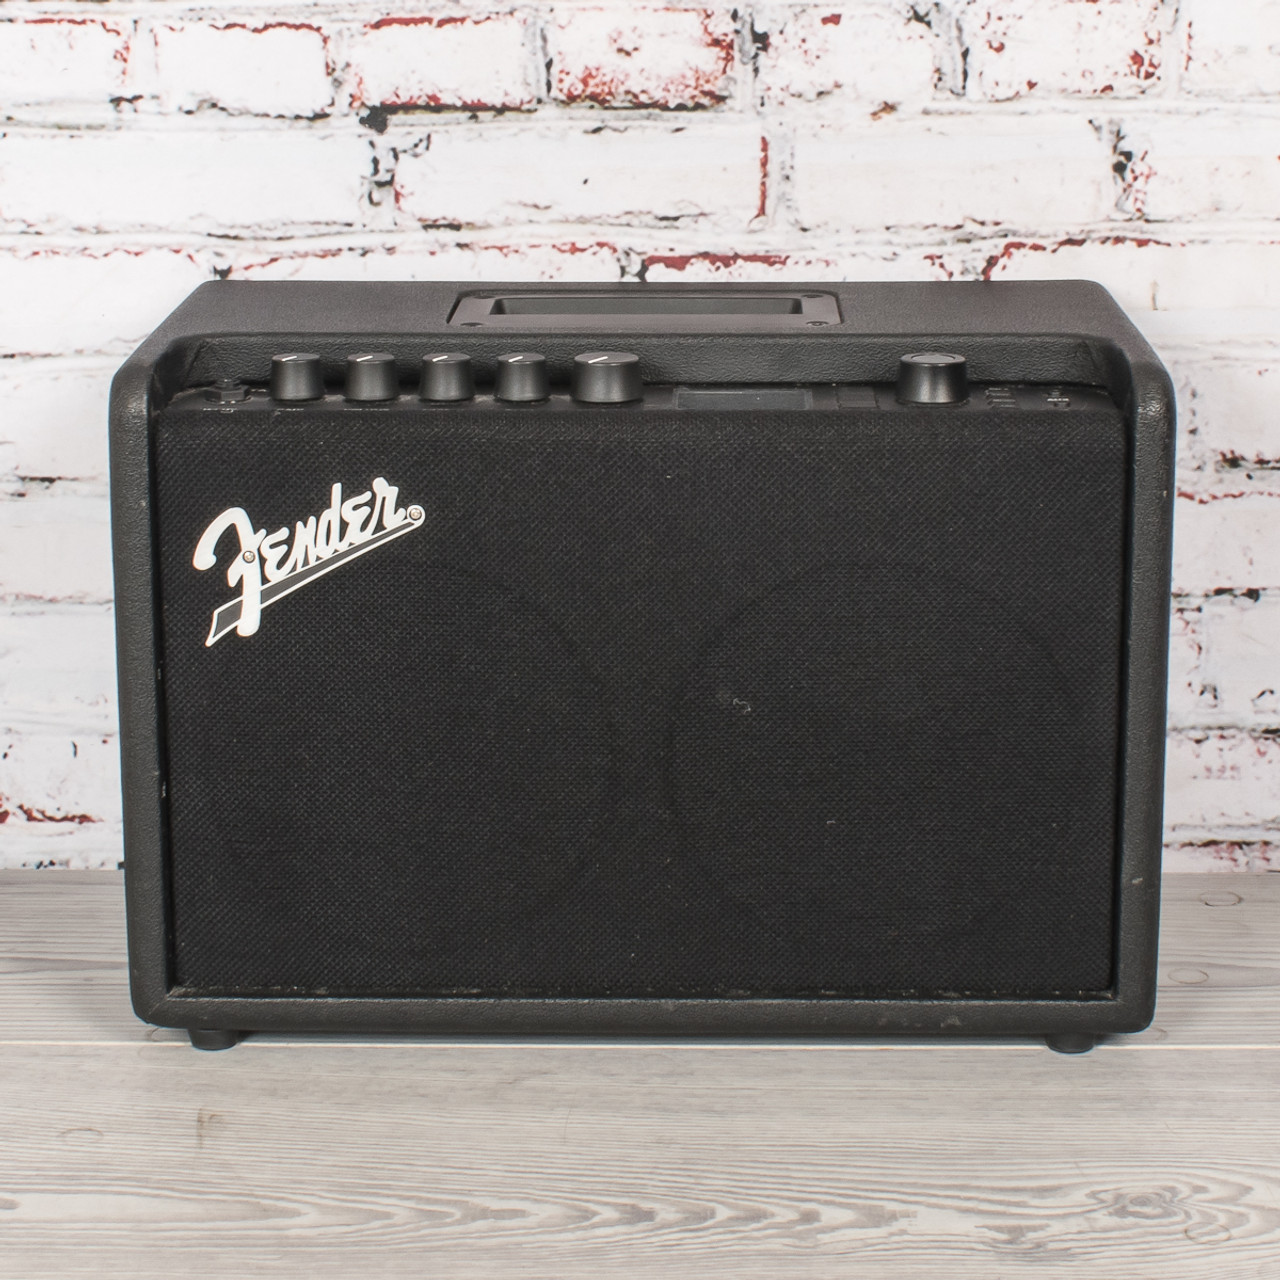 Replenishment teenager Recommended Fender - Mustang GT40 - Digital Combo Amplifier - Third Gen. - 40W - x3997  (USED) (ISS43171)